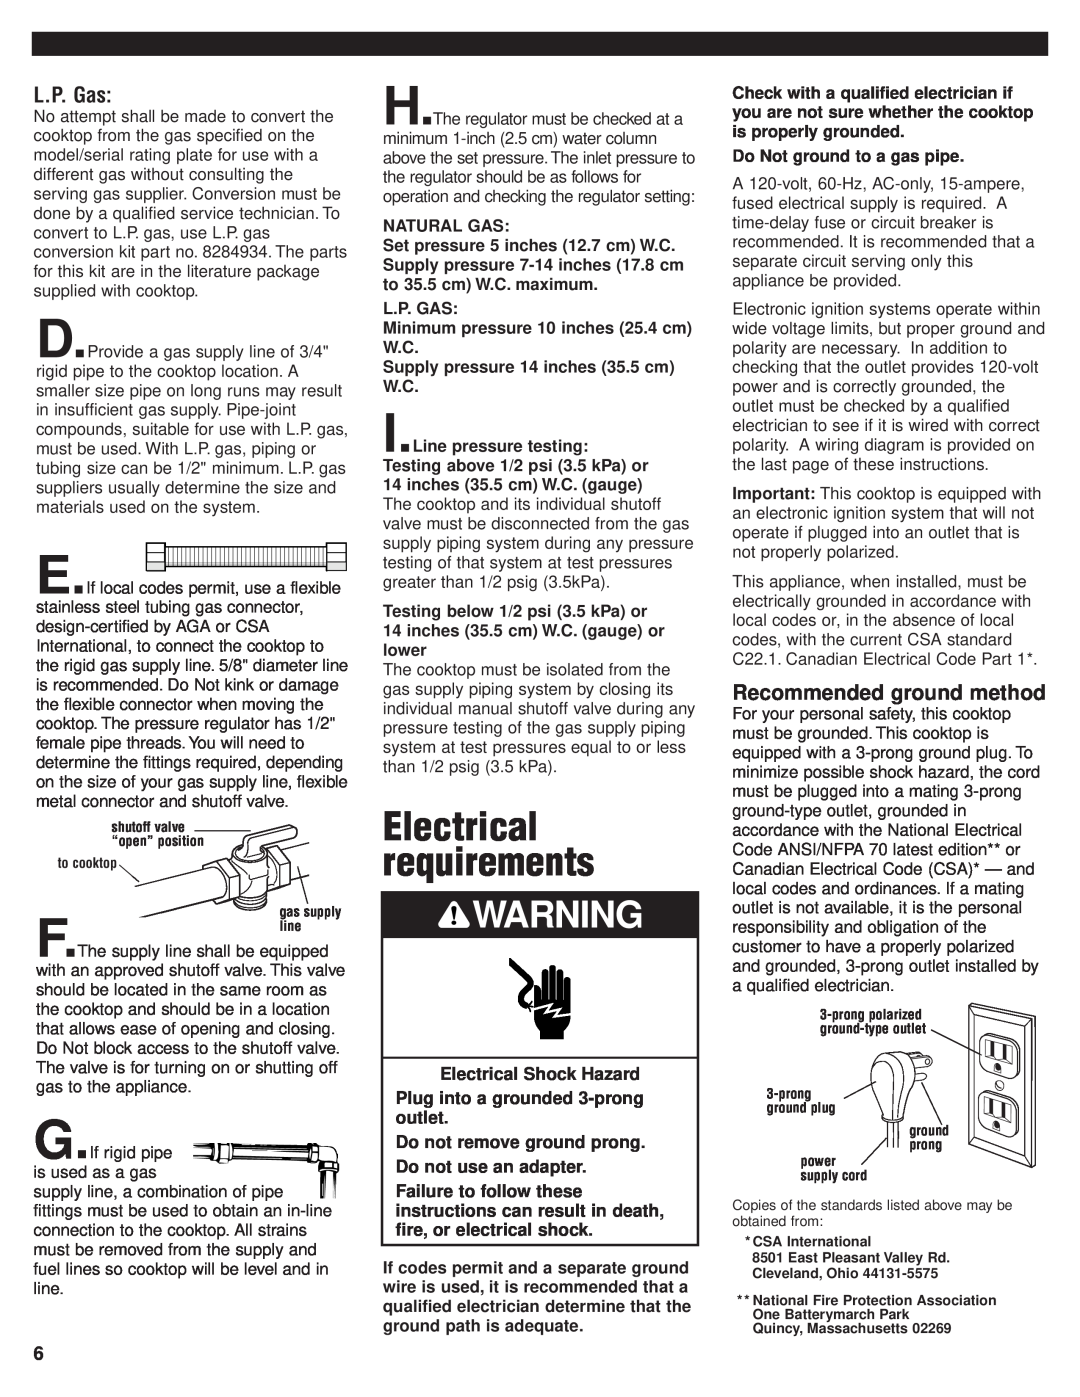 KitchenAid 8284908 installation instructions Electrical requirements, L.P. Gas, Recommended ground method 